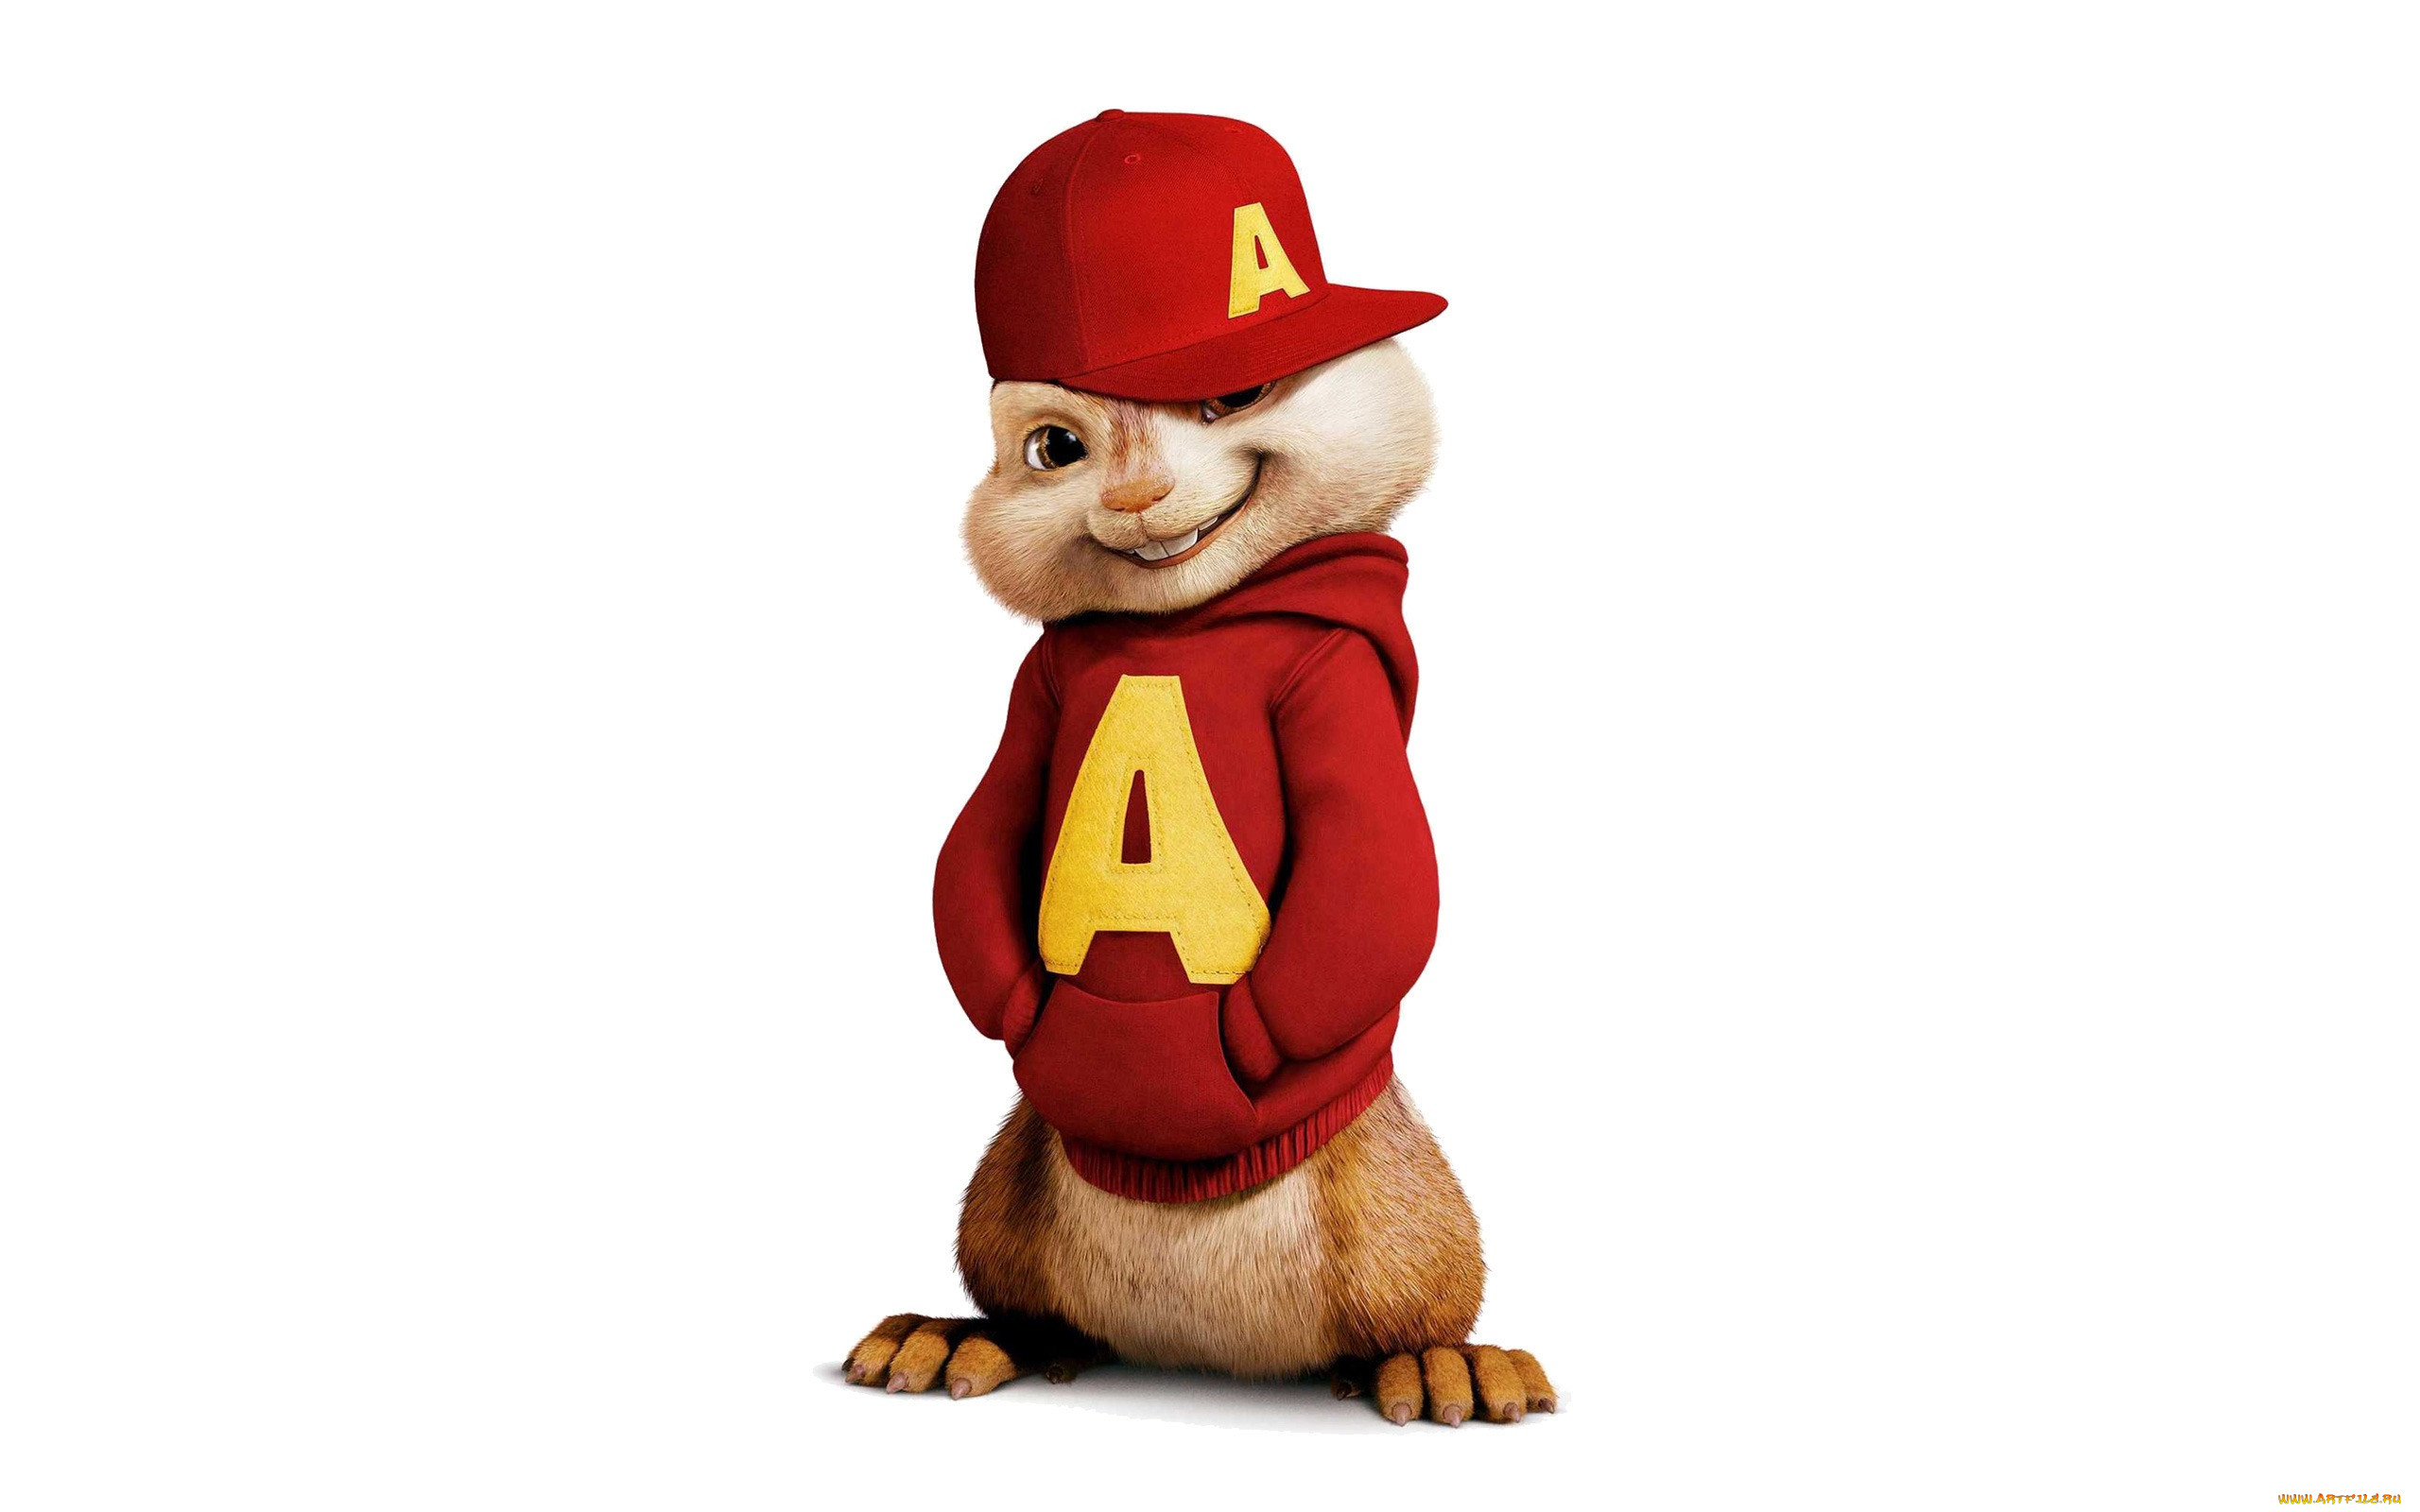 alvin and the chipmunks the squeakquel, , alvin and the chipmunks,  the squeakquel, 